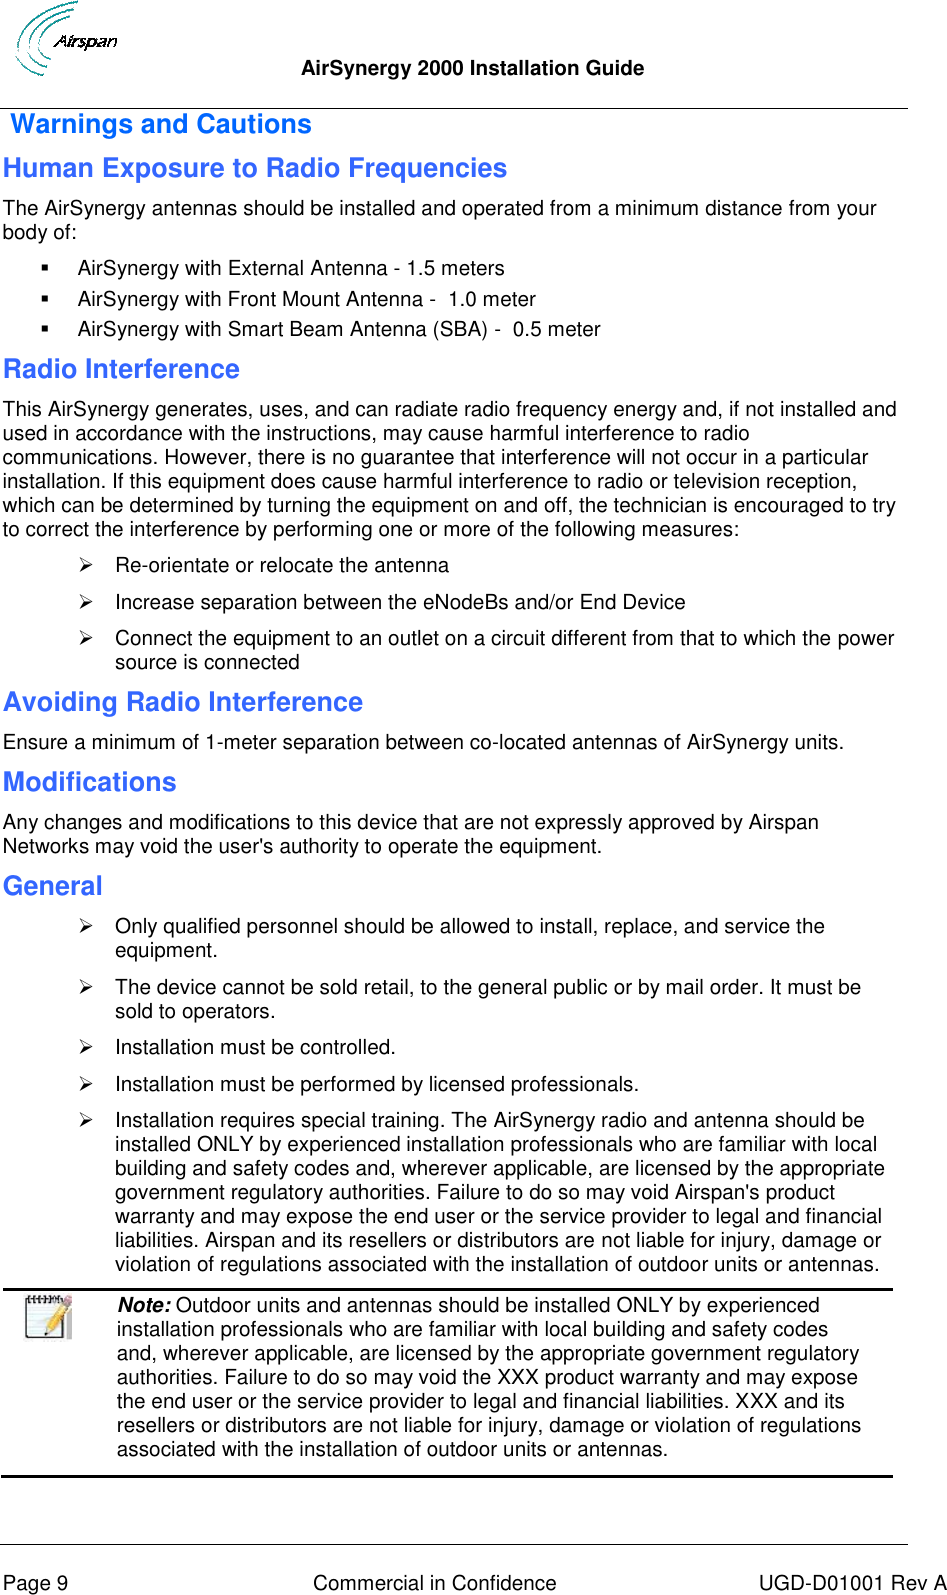  AirSynergy 2000 Installation Guide     Page 9  Commercial in Confidence  UGD-D01001 Rev A  Warnings and Cautions Human Exposure to Radio Frequencies The AirSynergy antennas should be installed and operated from a minimum distance from your body of:    AirSynergy with External Antenna - 1.5 meters   AirSynergy with Front Mount Antenna -  1.0 meter   AirSynergy with Smart Beam Antenna (SBA) -  0.5 meter  Radio Interference This AirSynergy generates, uses, and can radiate radio frequency energy and, if not installed and used in accordance with the instructions, may cause harmful interference to radio communications. However, there is no guarantee that interference will not occur in a particular installation. If this equipment does cause harmful interference to radio or television reception, which can be determined by turning the equipment on and off, the technician is encouraged to try to correct the interference by performing one or more of the following measures:  Re-orientate or relocate the antenna    Increase separation between the eNodeBs and/or End Device   Connect the equipment to an outlet on a circuit different from that to which the power source is connected Avoiding Radio Interference  Ensure a minimum of 1-meter separation between co-located antennas of AirSynergy units. Modifications Any changes and modifications to this device that are not expressly approved by Airspan Networks may void the user&apos;s authority to operate the equipment.  General   Only qualified personnel should be allowed to install, replace, and service the equipment.   The device cannot be sold retail, to the general public or by mail order. It must be sold to operators.   Installation must be controlled.   Installation must be performed by licensed professionals.   Installation requires special training. The AirSynergy radio and antenna should be installed ONLY by experienced installation professionals who are familiar with local building and safety codes and, wherever applicable, are licensed by the appropriate government regulatory authorities. Failure to do so may void Airspan&apos;s product warranty and may expose the end user or the service provider to legal and financial liabilities. Airspan and its resellers or distributors are not liable for injury, damage or violation of regulations associated with the installation of outdoor units or antennas.   Note: Outdoor units and antennas should be installed ONLY by experienced installation professionals who are familiar with local building and safety codes and, wherever applicable, are licensed by the appropriate government regulatory authorities. Failure to do so may void the XXX product warranty and may expose the end user or the service provider to legal and financial liabilities. XXX and its resellers or distributors are not liable for injury, damage or violation of regulations associated with the installation of outdoor units or antennas.  